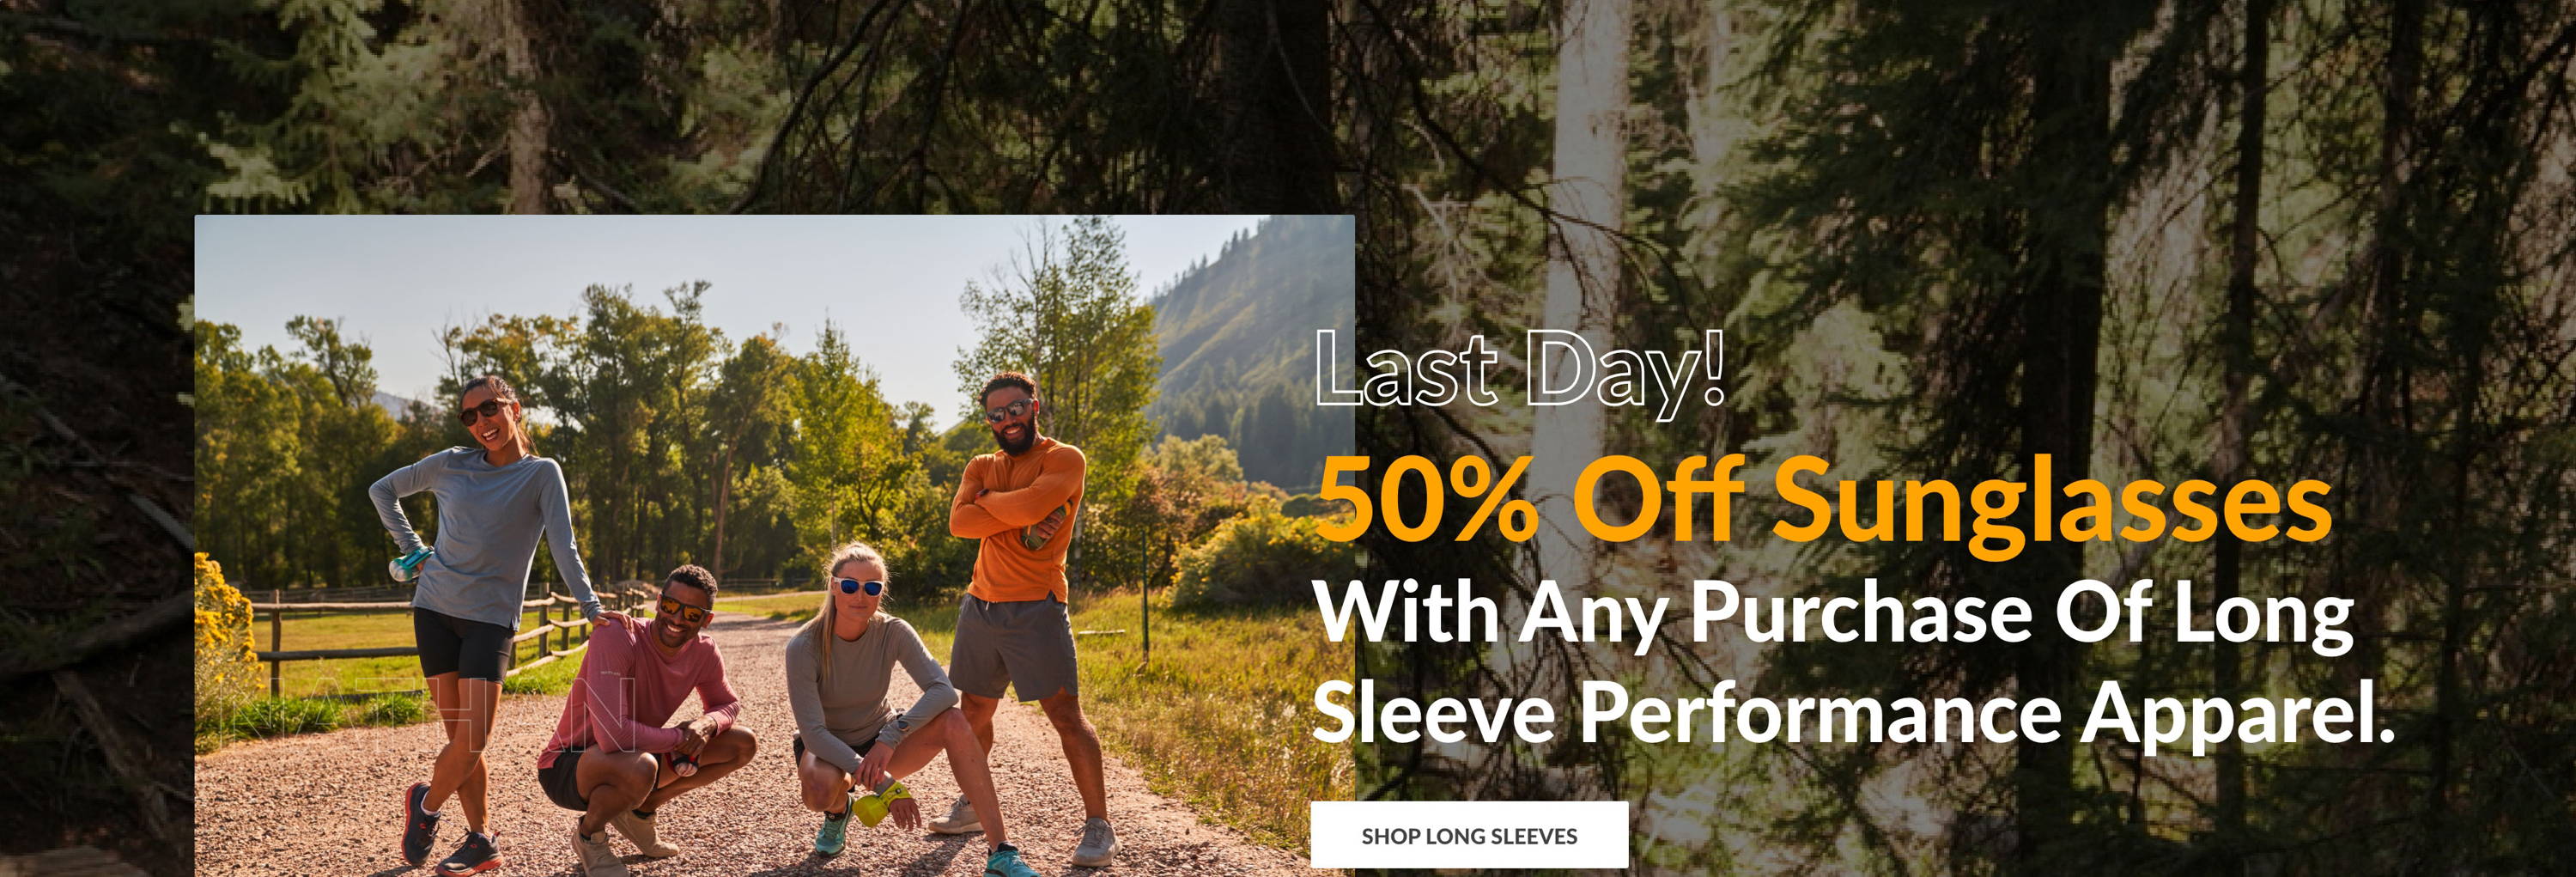 Last Day! 50% Off Sunglasses with any purchase of long sleeve performance apparel.